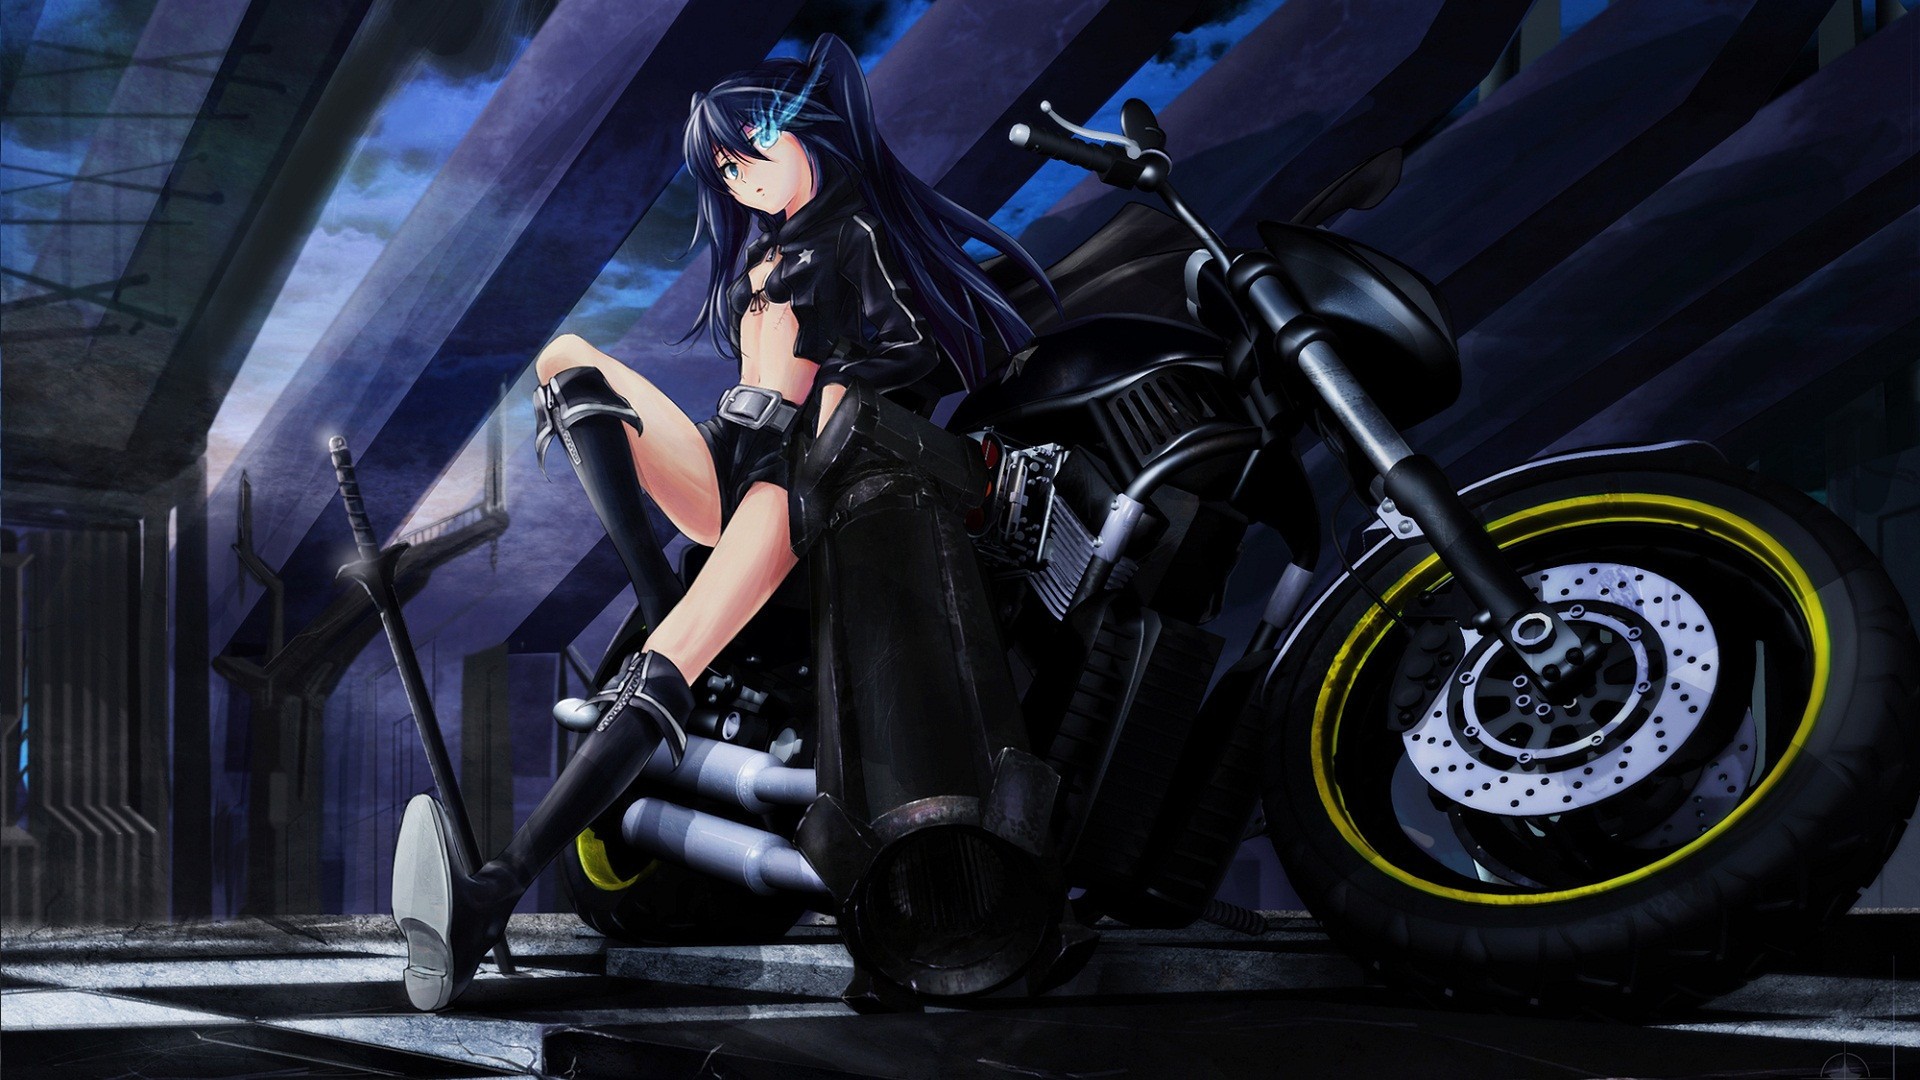 Anime Girl With Motorcycle - HD Wallpaper 